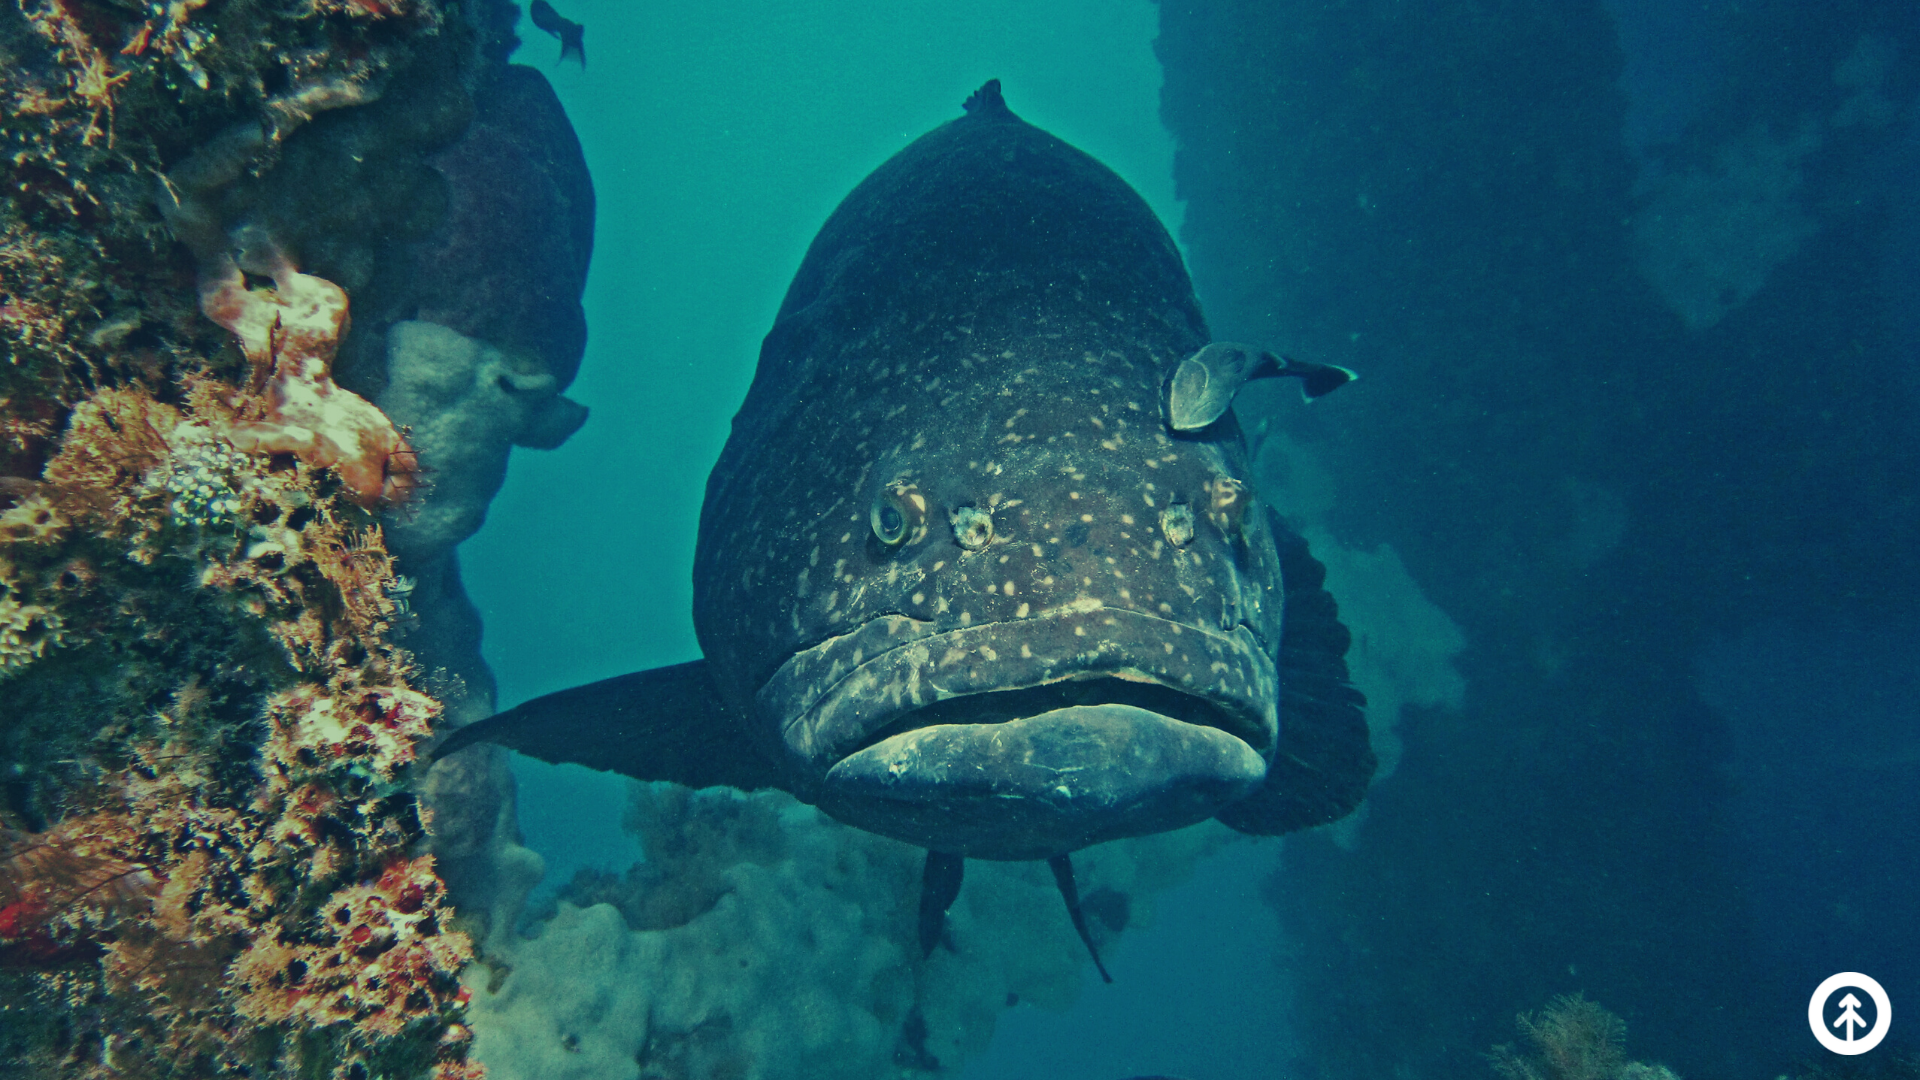 A giant grouper on a reef off the coast of Florida.